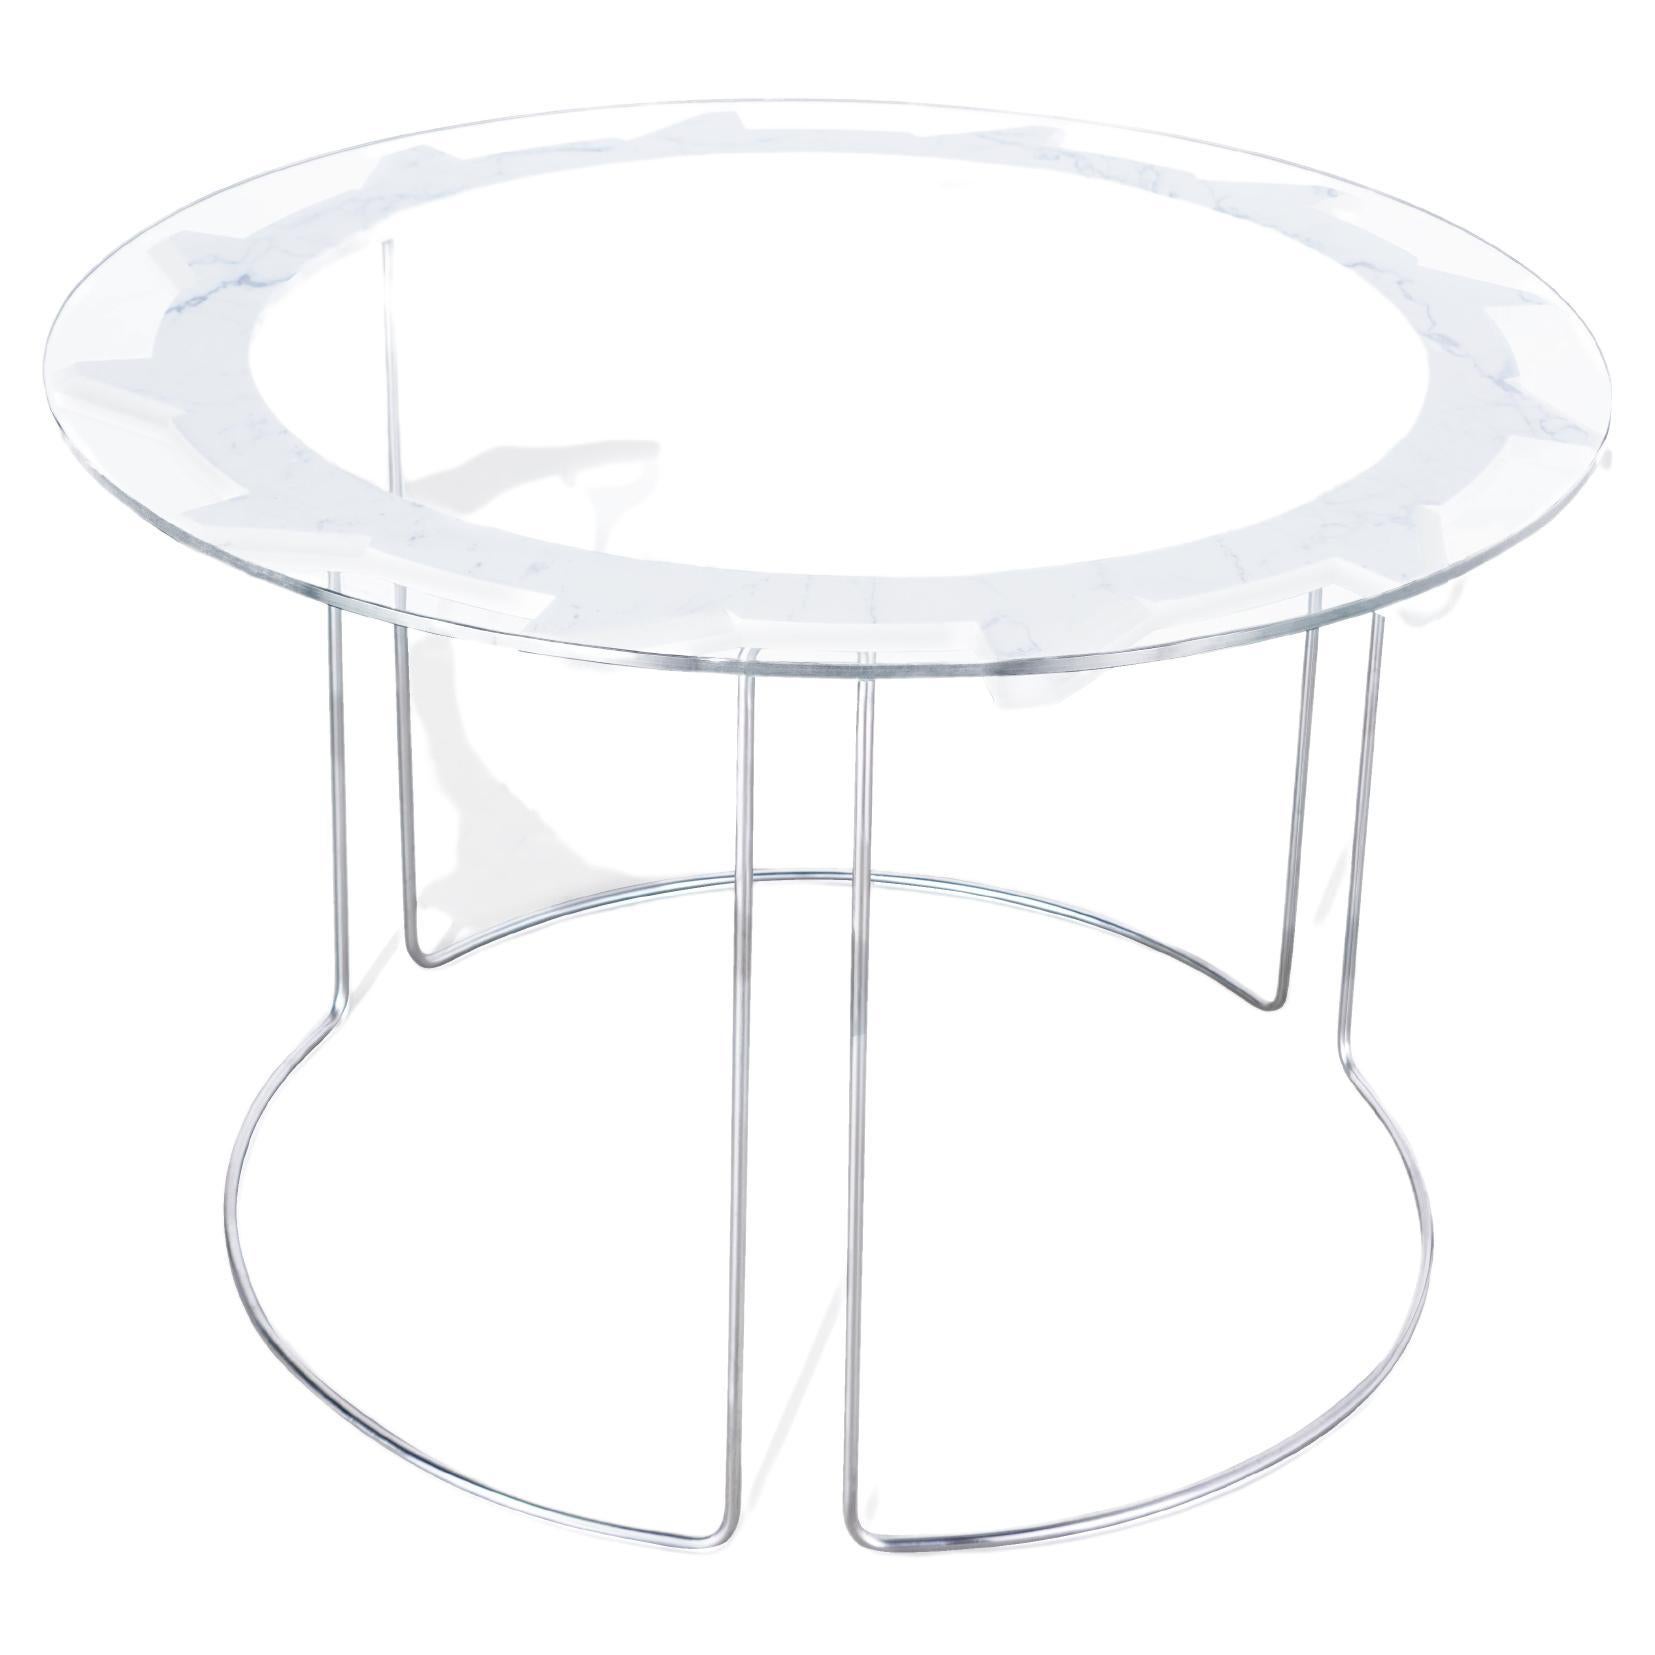 Buzzsaw Dining Table – White For Sale